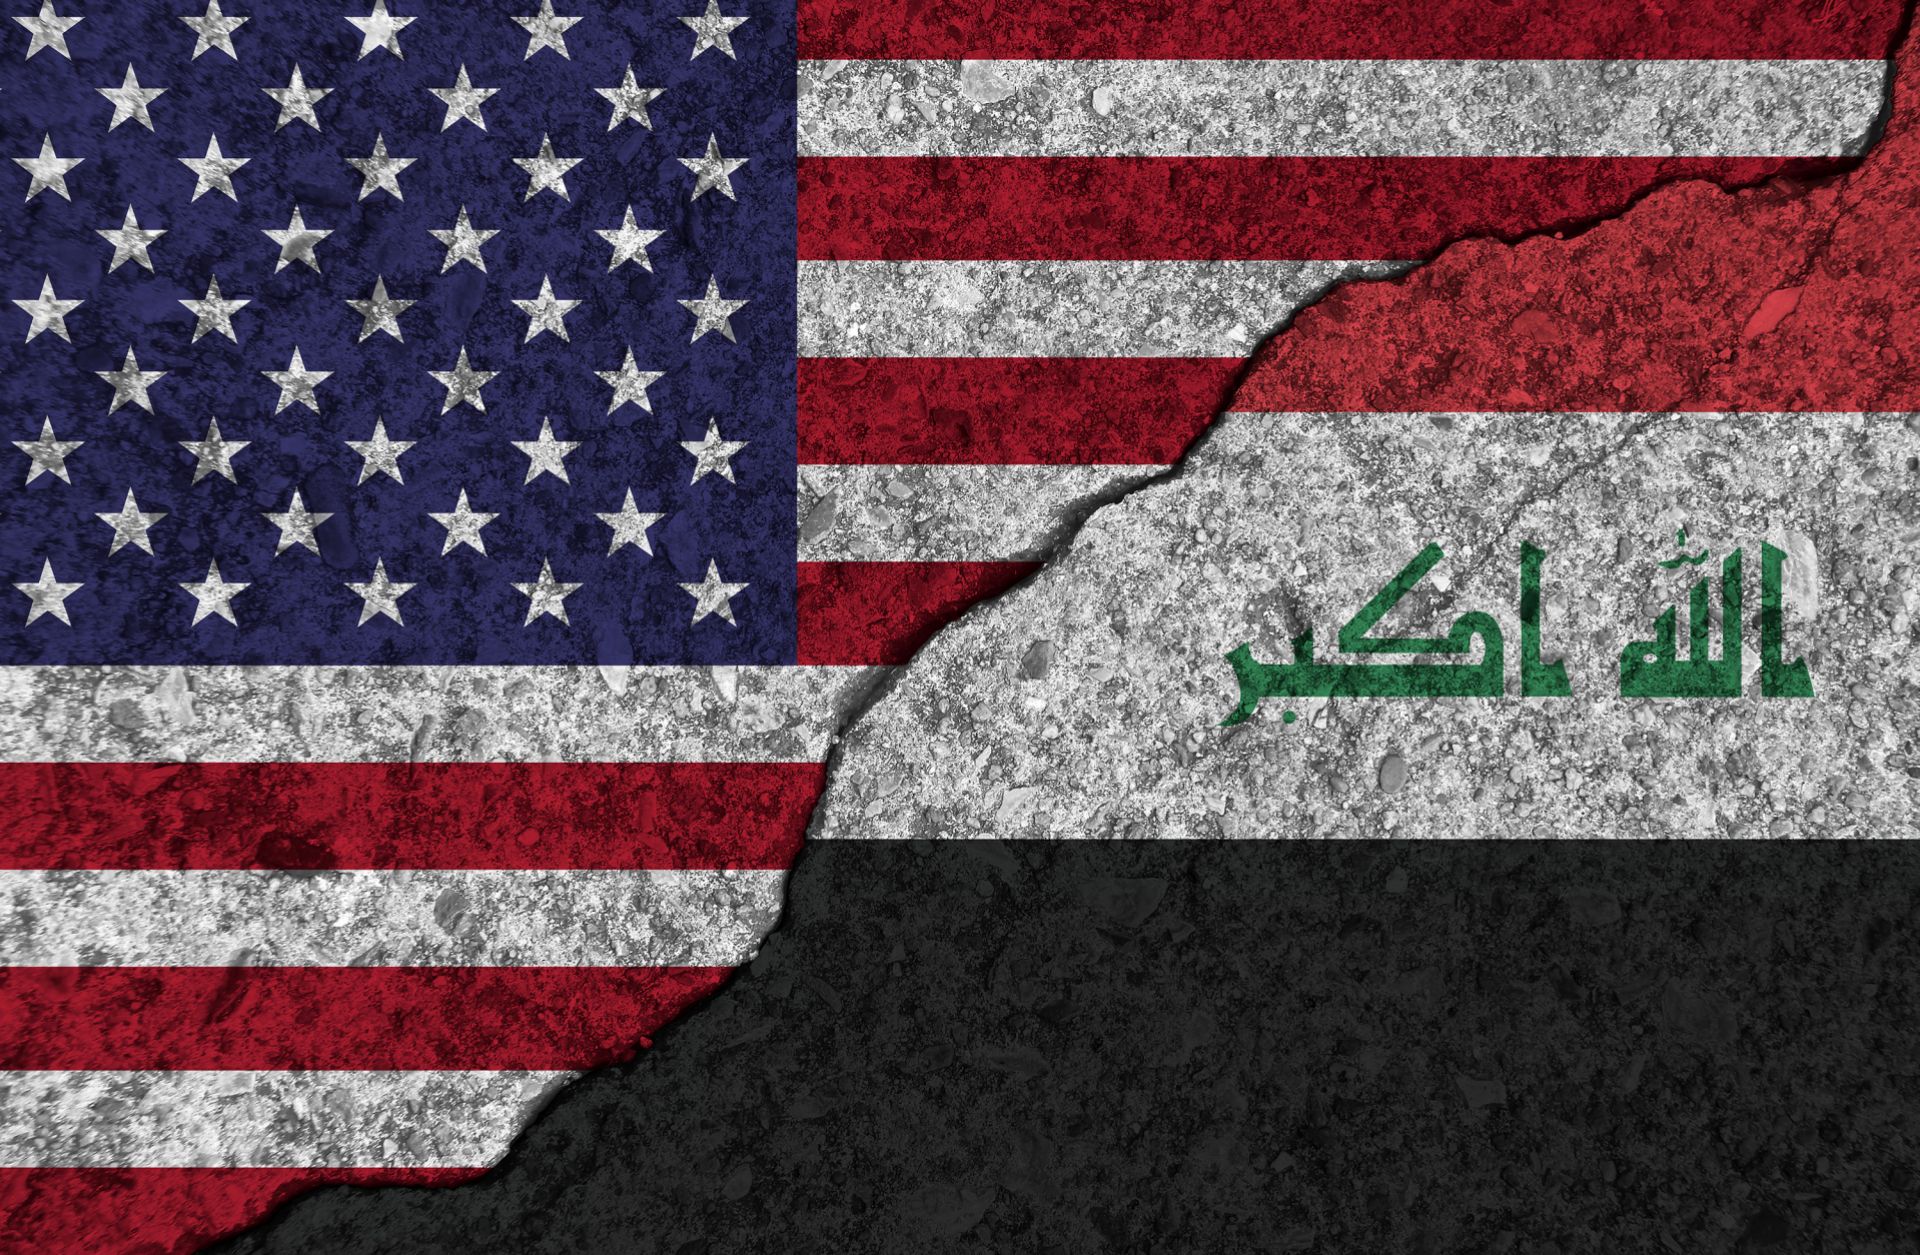 An image of cracked, painted picture of the U.S. and Iraqi flags illustrates the two countries' decaying relationship due to Washington's ongoing pressure campaign and proxy battle against Iran.  